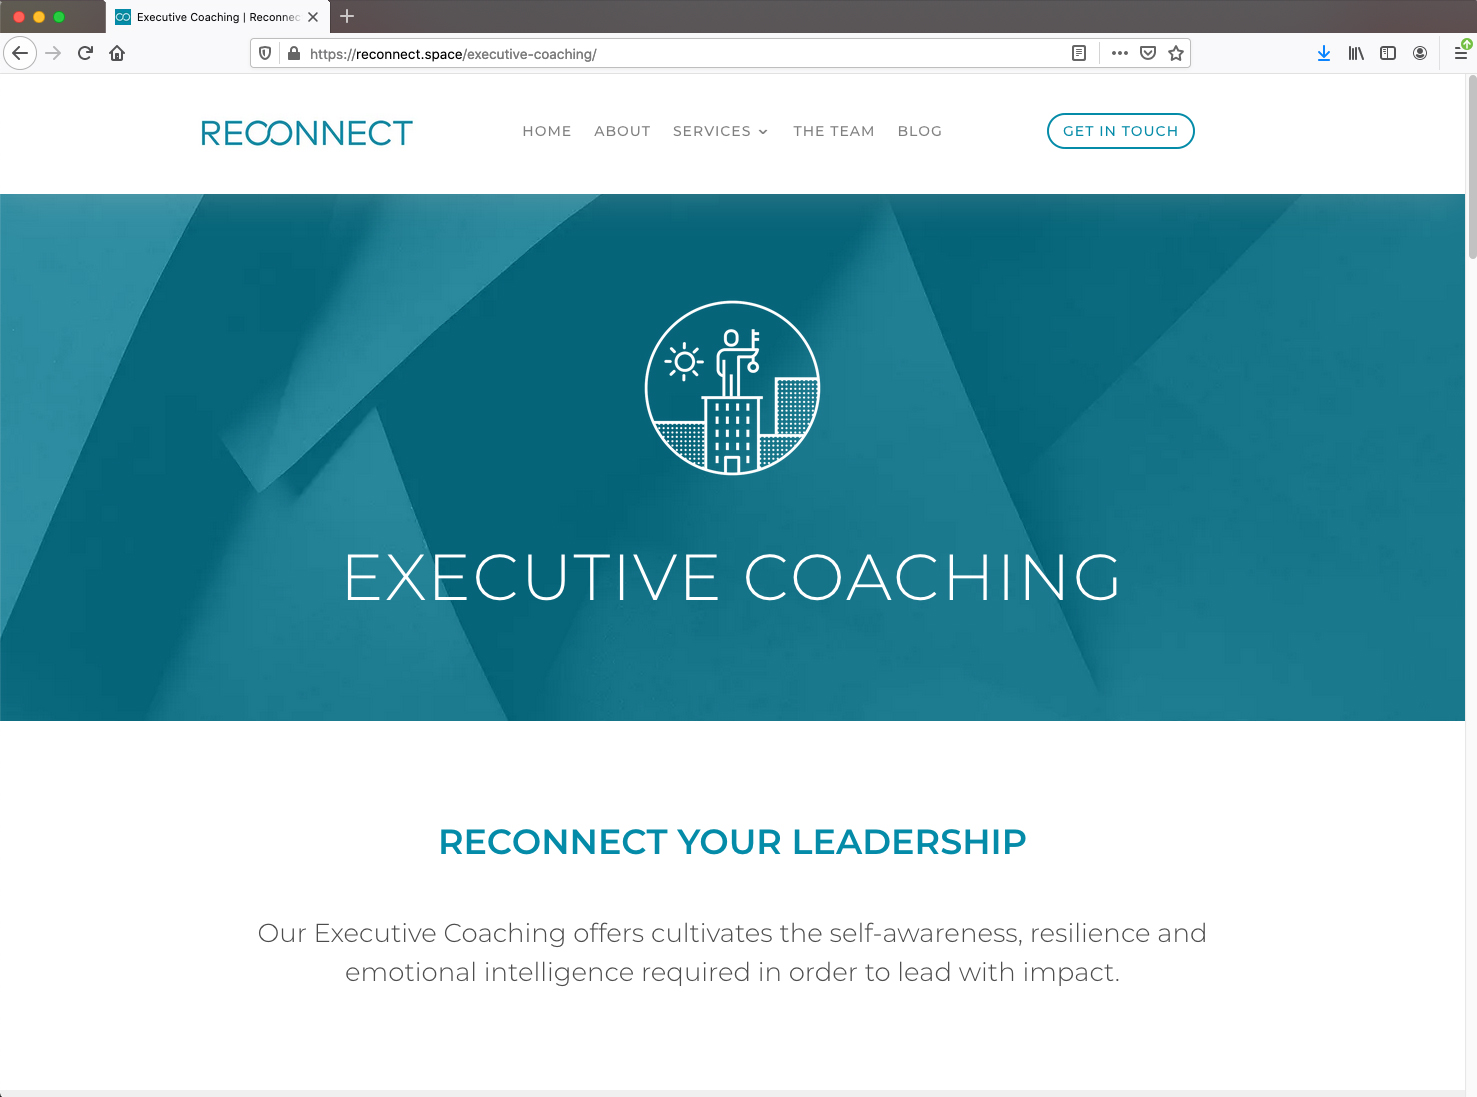 Reconnect Executive Coaching typical website page